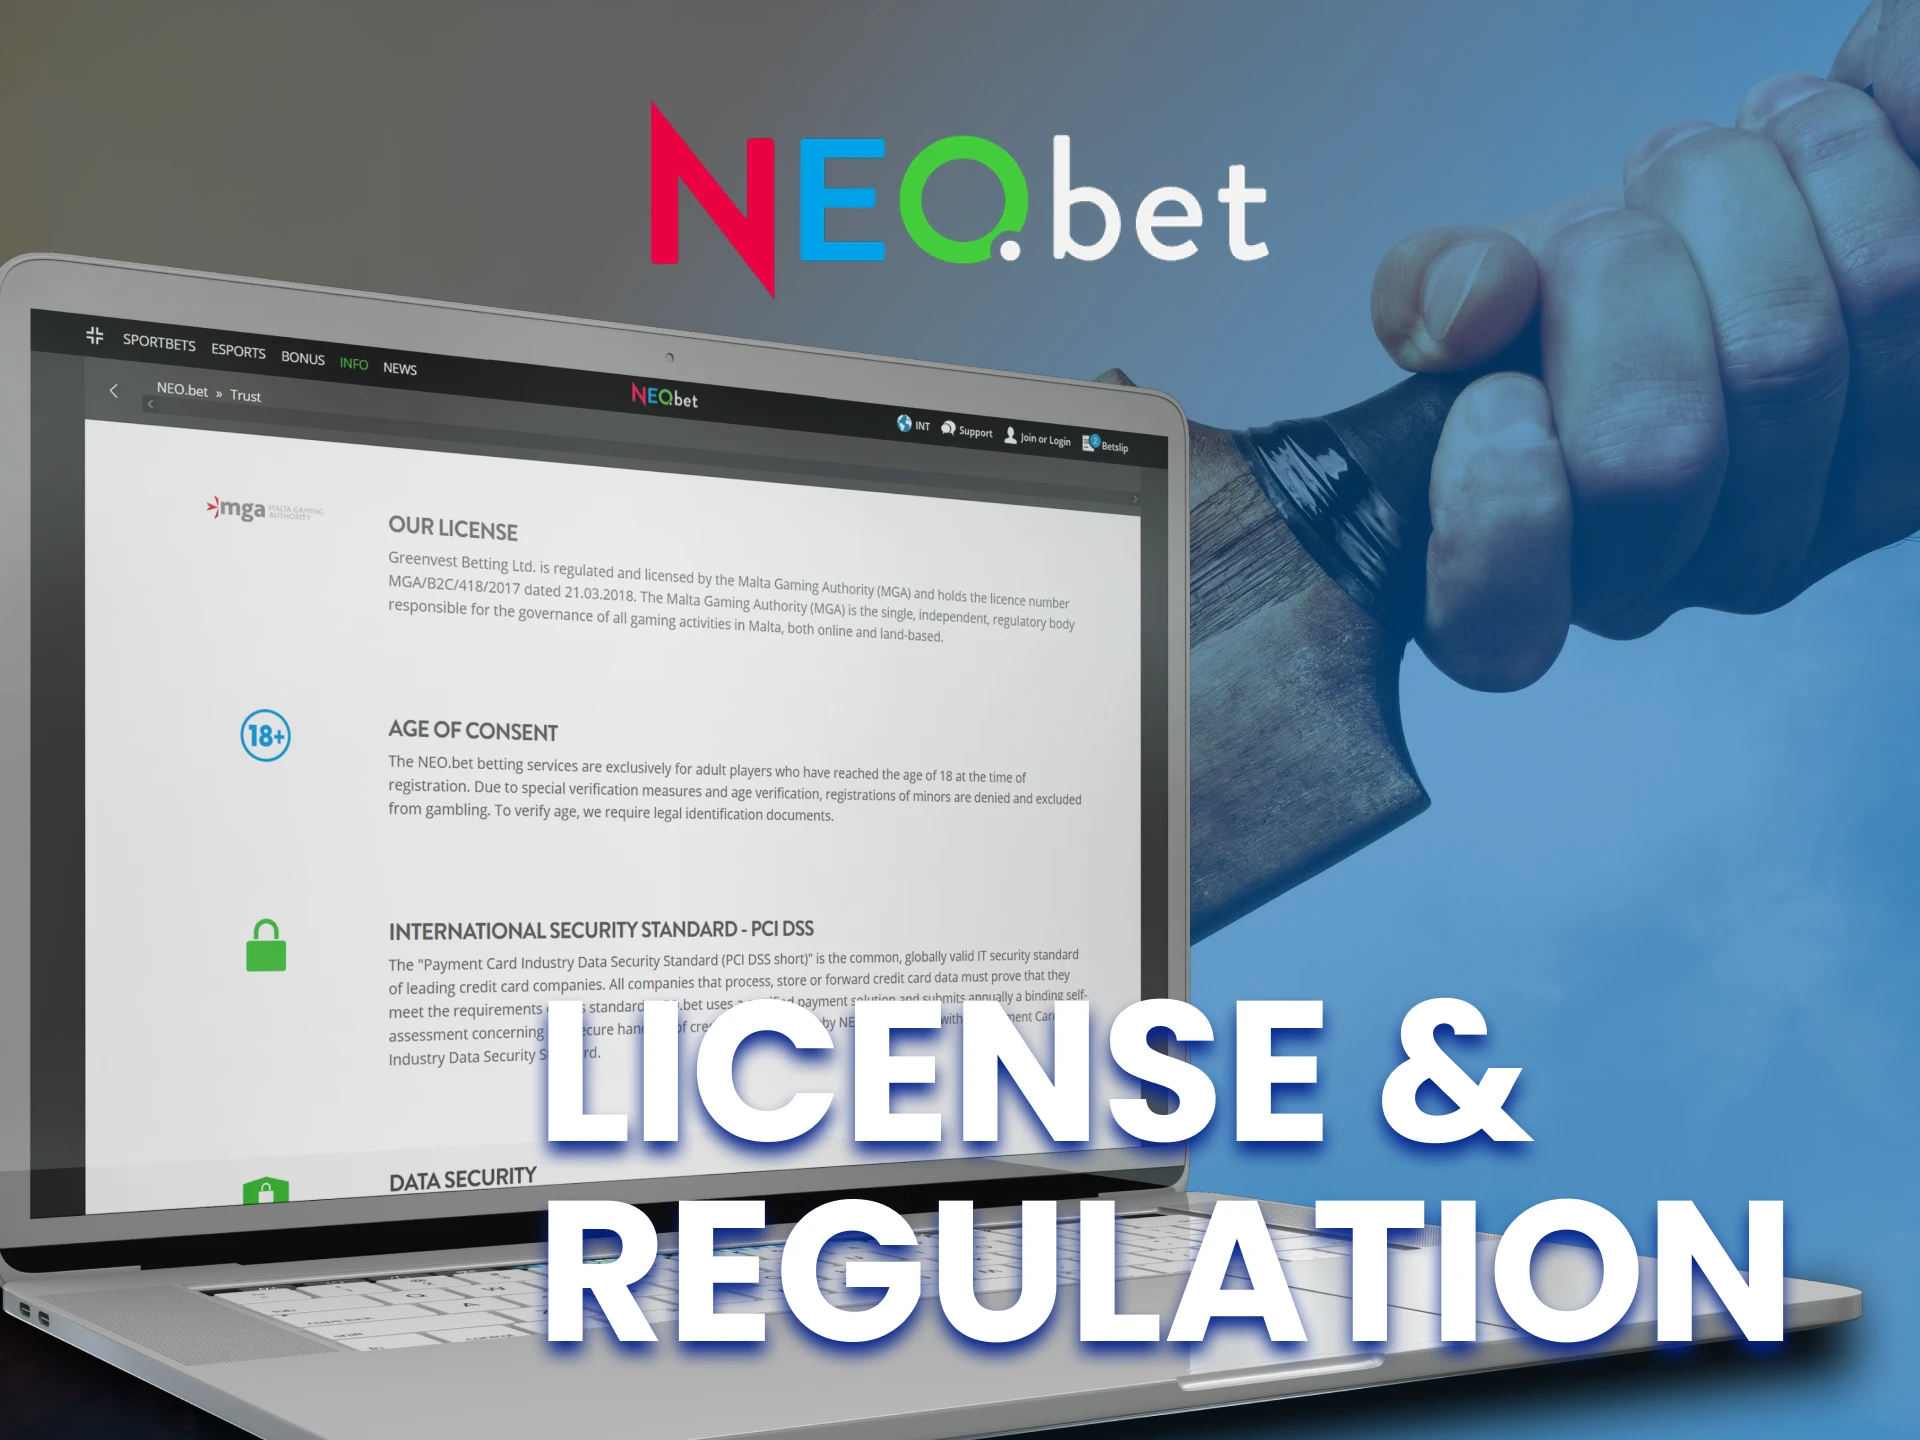 NEO.bet is officially licensed and safe for players.